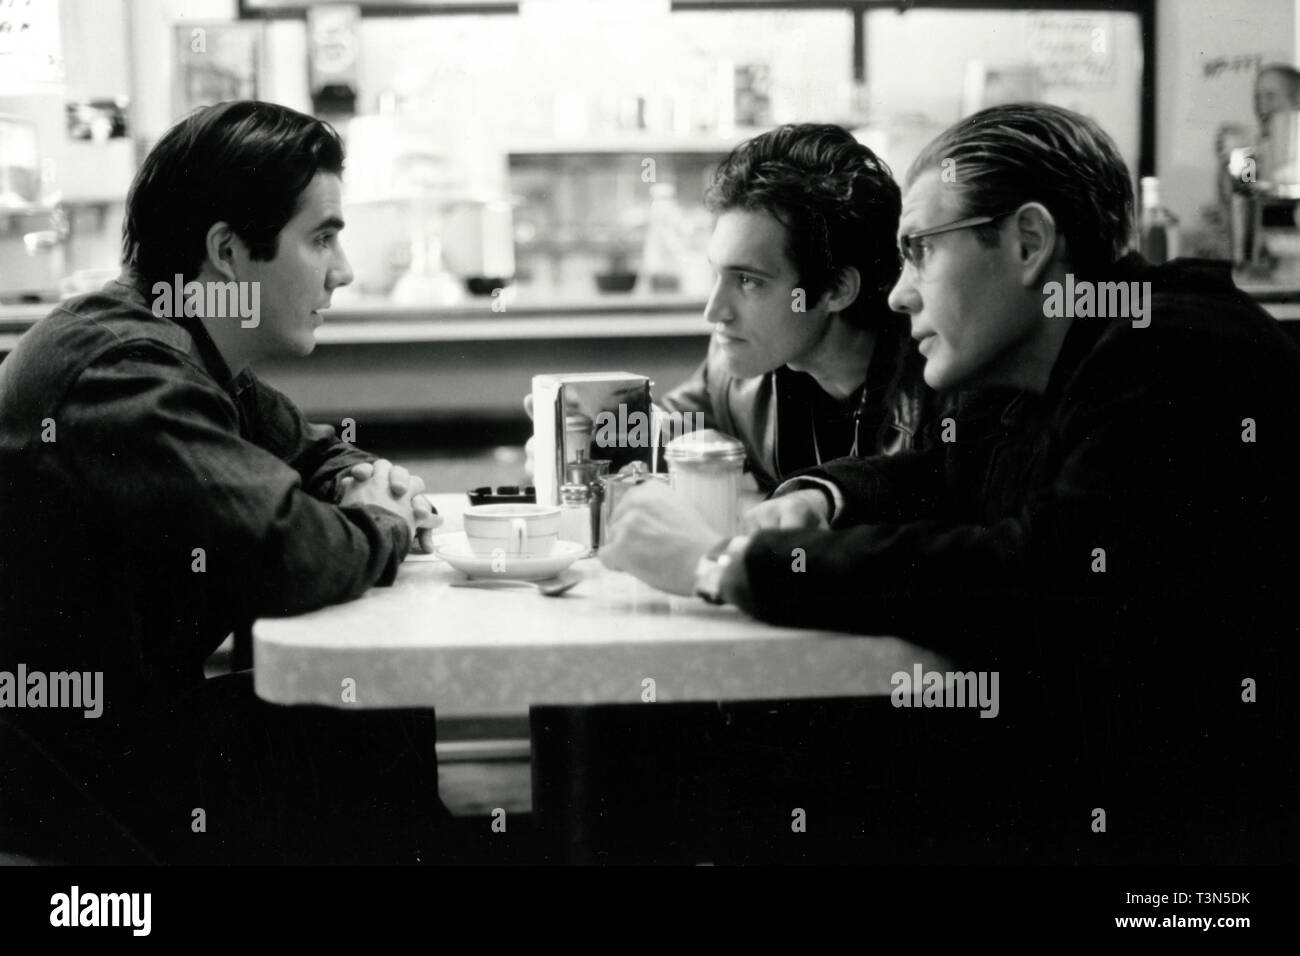 William Forsythe, Adam Trese and Vincent Gallo in the movie Palookaville, 1995 Stock Photo